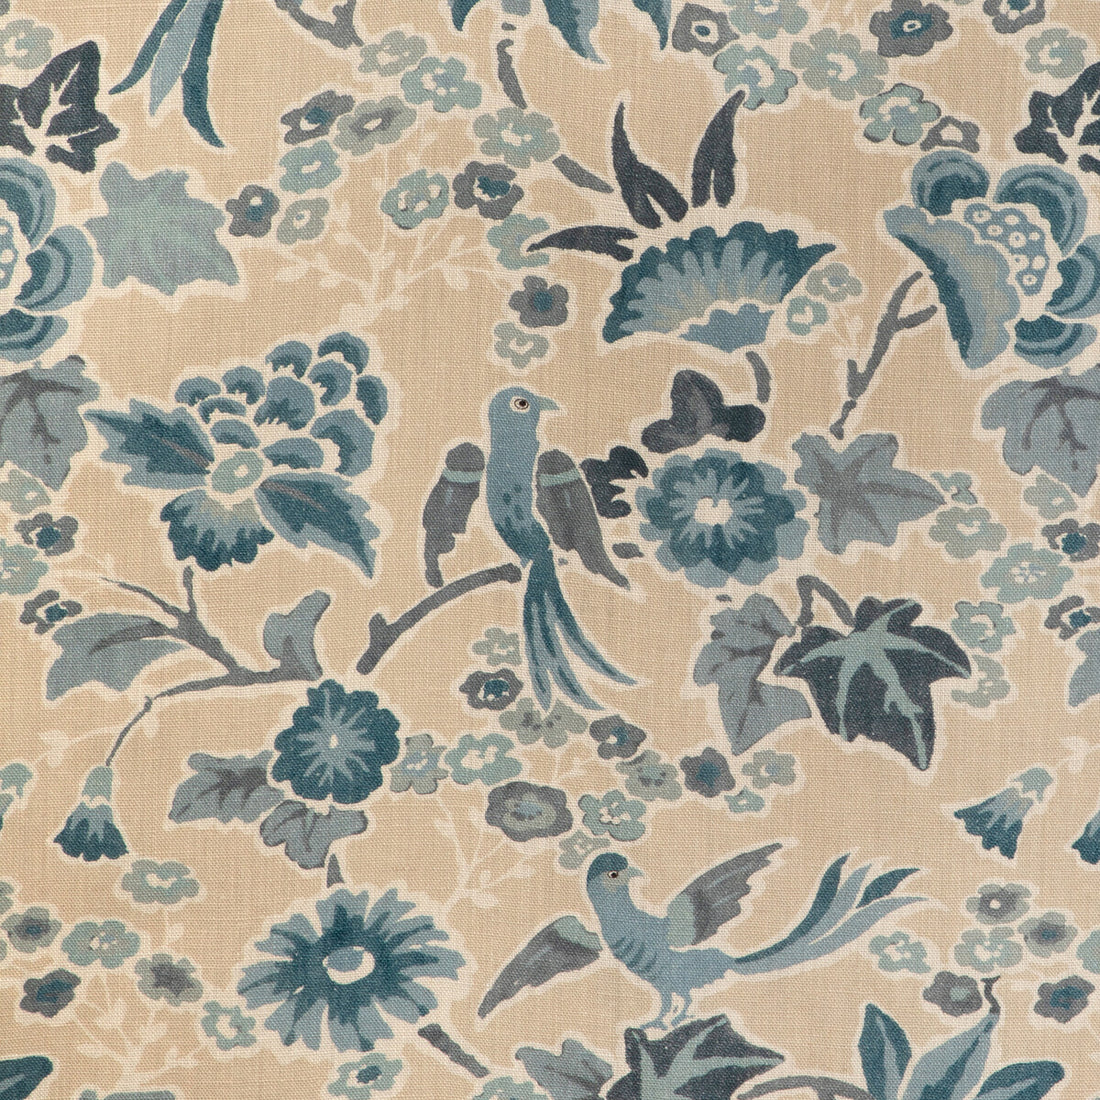 Posy Print fabric in sand/sky color - pattern 2023142.516.0 - by Lee Jofa in the Garden Walk collection